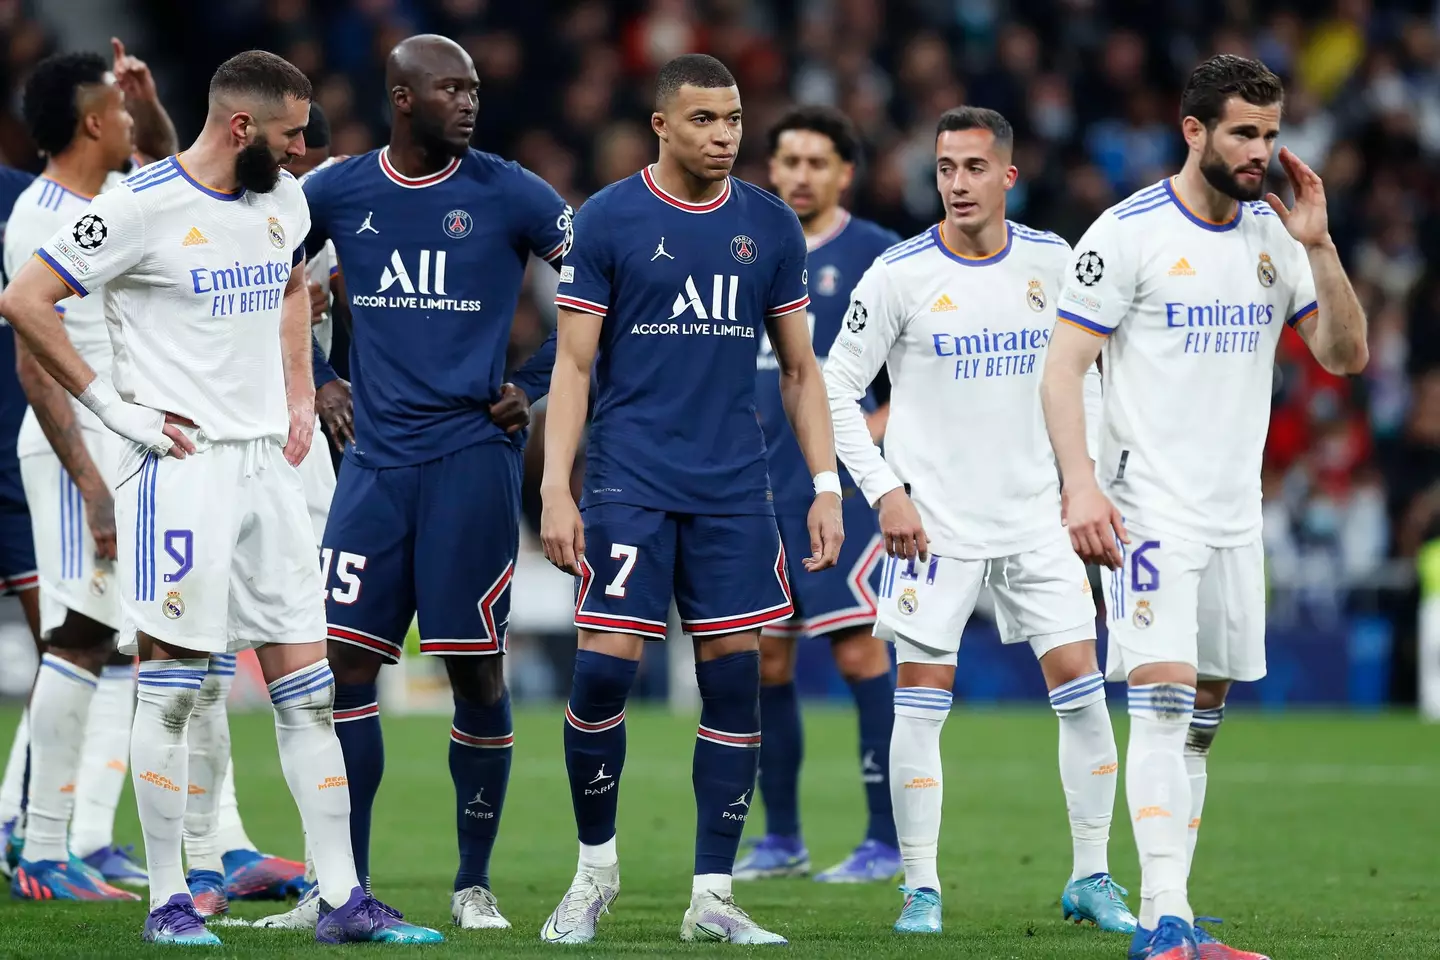 Mbappe found himself in the middle of a tug-of-war between PSG and Real Madrid. Image: PA Images